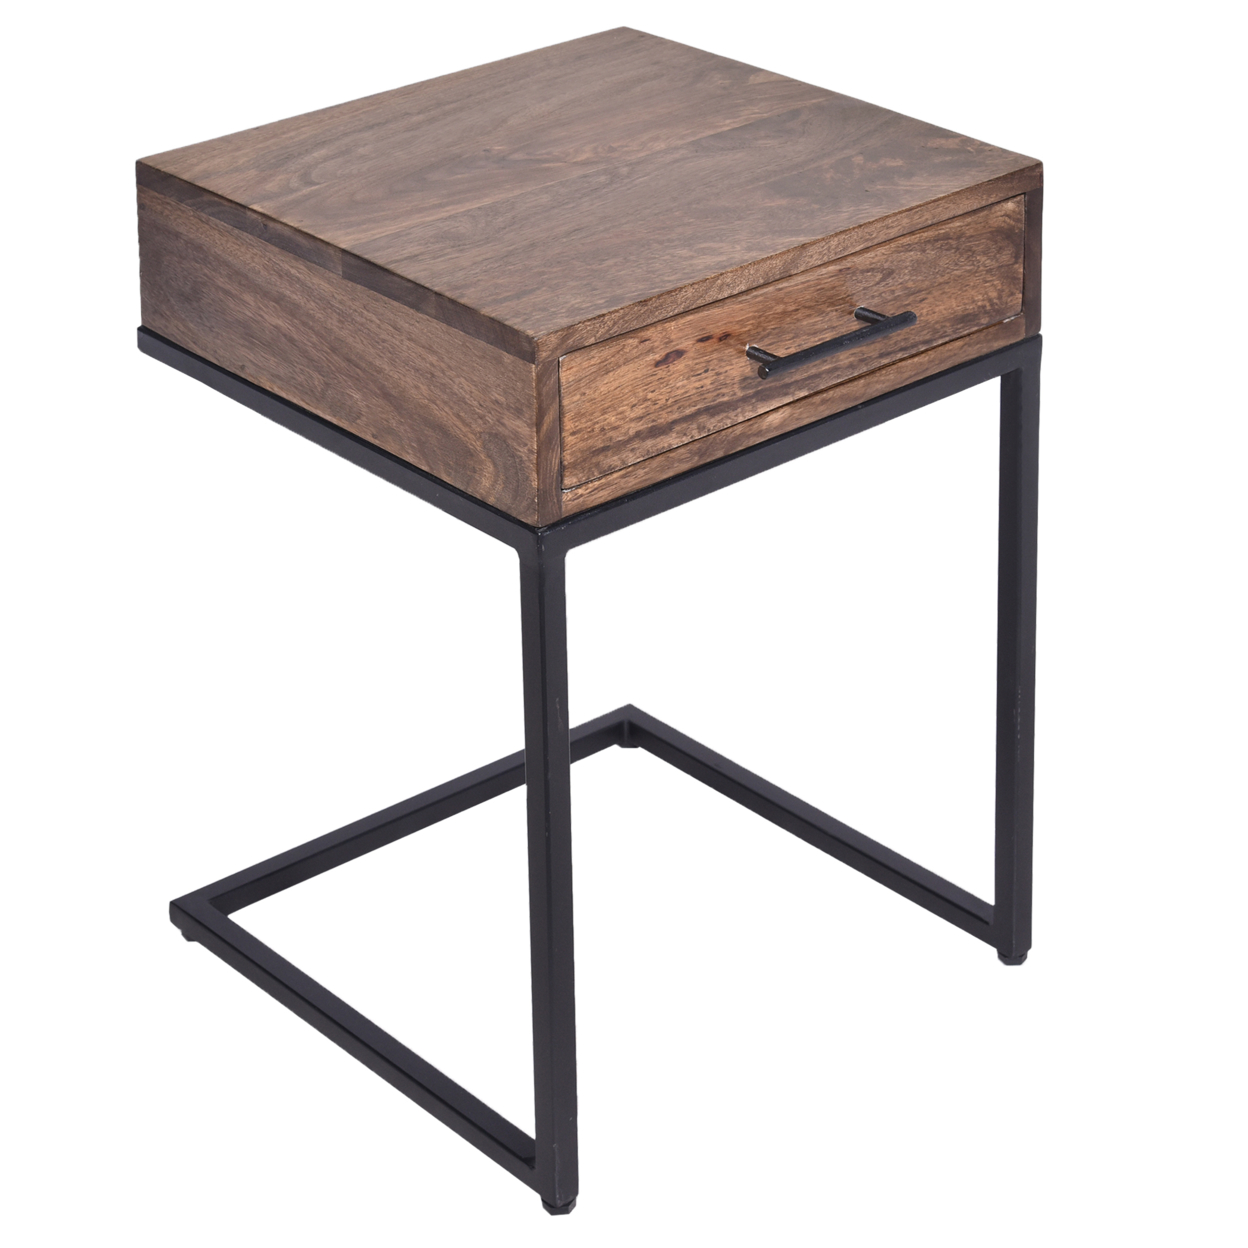 Mango Wood Side Table With Drawer And Cantilever Iron Base, Brown And Black- Saltoro Sherpi